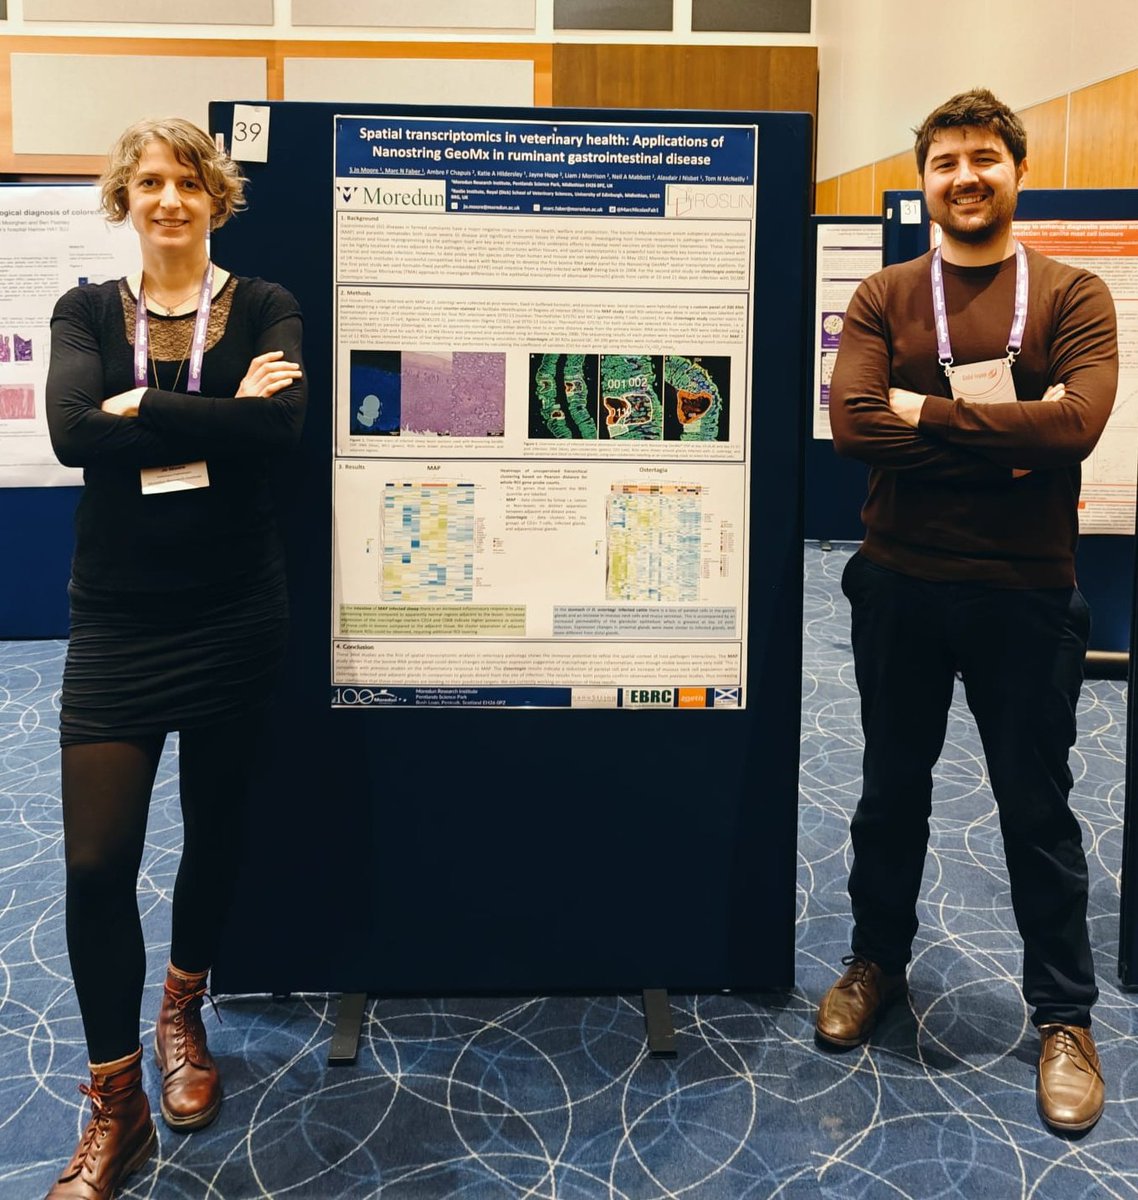 I had the great opportunity to show our project on spatial transcriptomics in farmed ruminants with Moreduns new head of disease control #JoMoore. Our work investigates the spatial effects of infection with mycobacteria avium paratuberculosis and Ostertagia ostetagi in cattle.